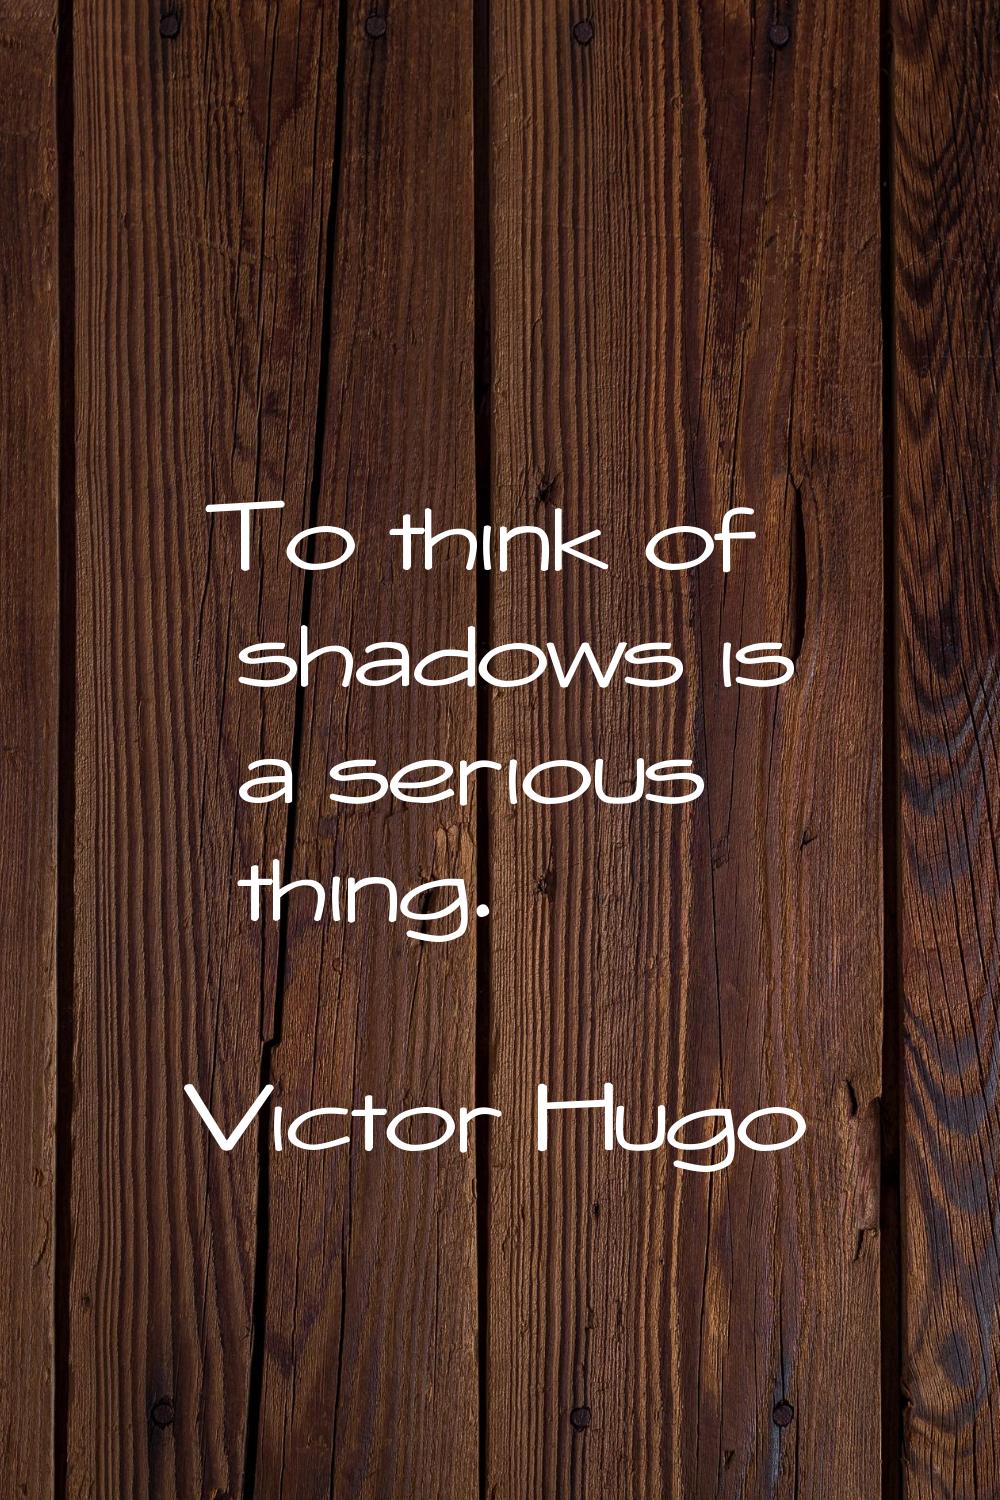 To think of shadows is a serious thing.